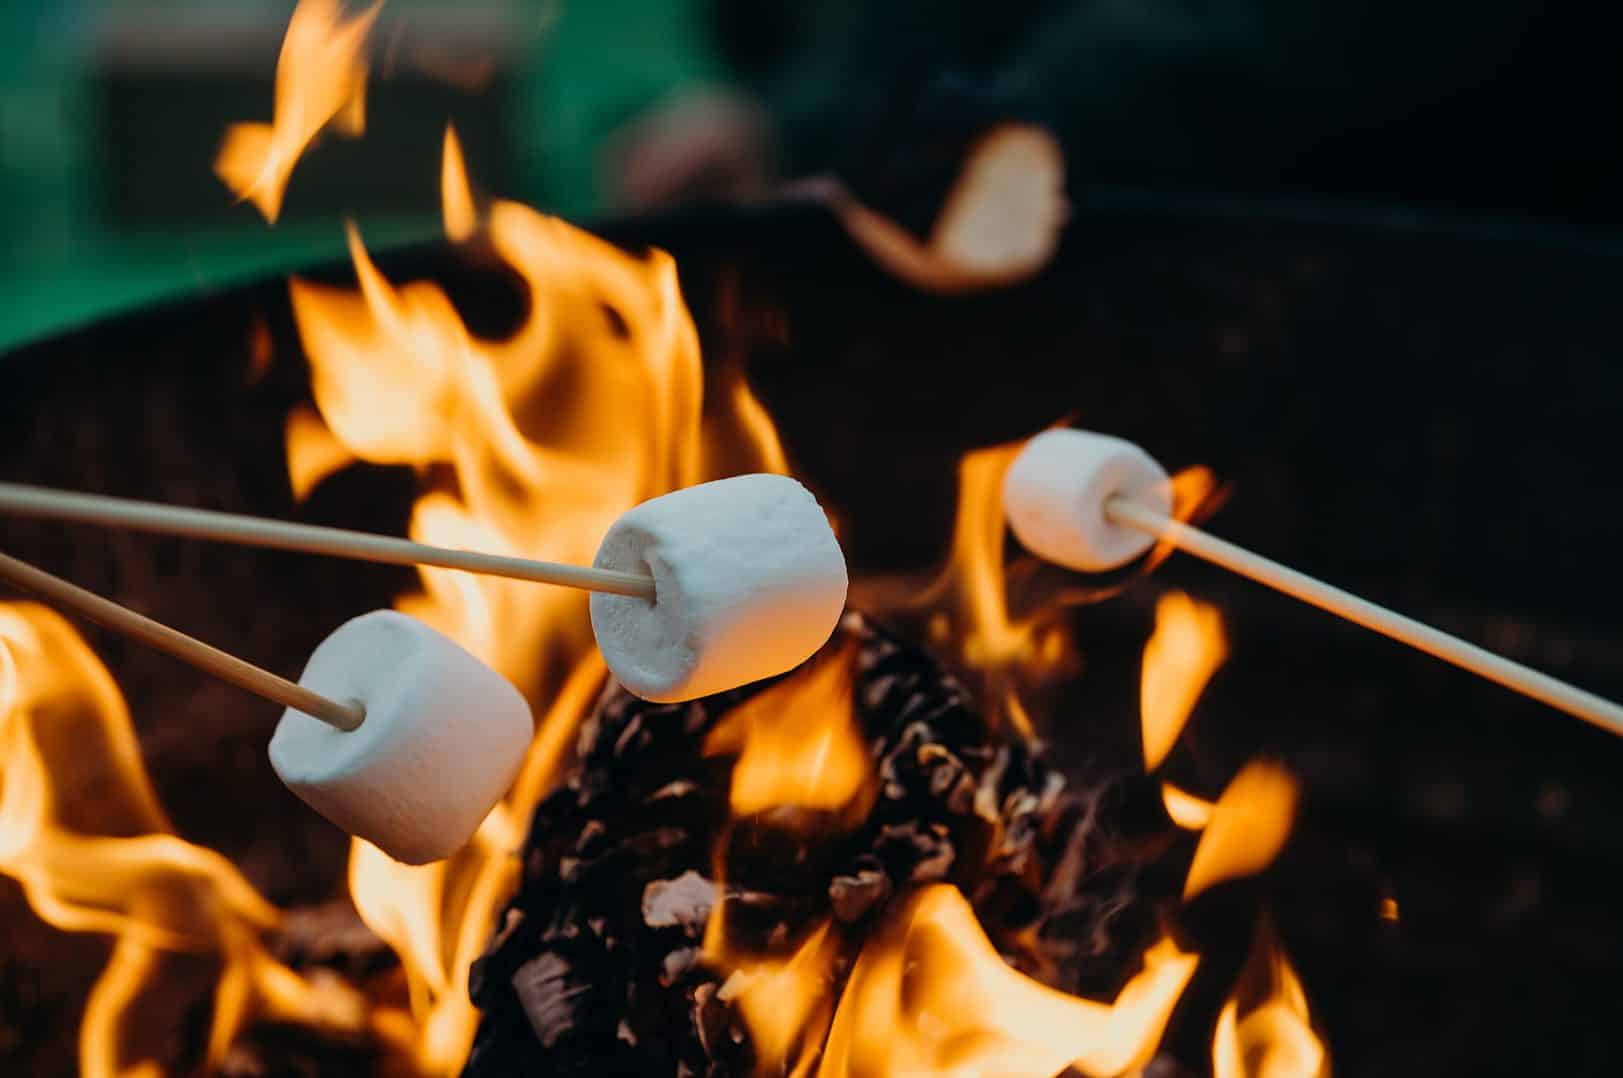 marshmallows on sticks being roasted on an open flame